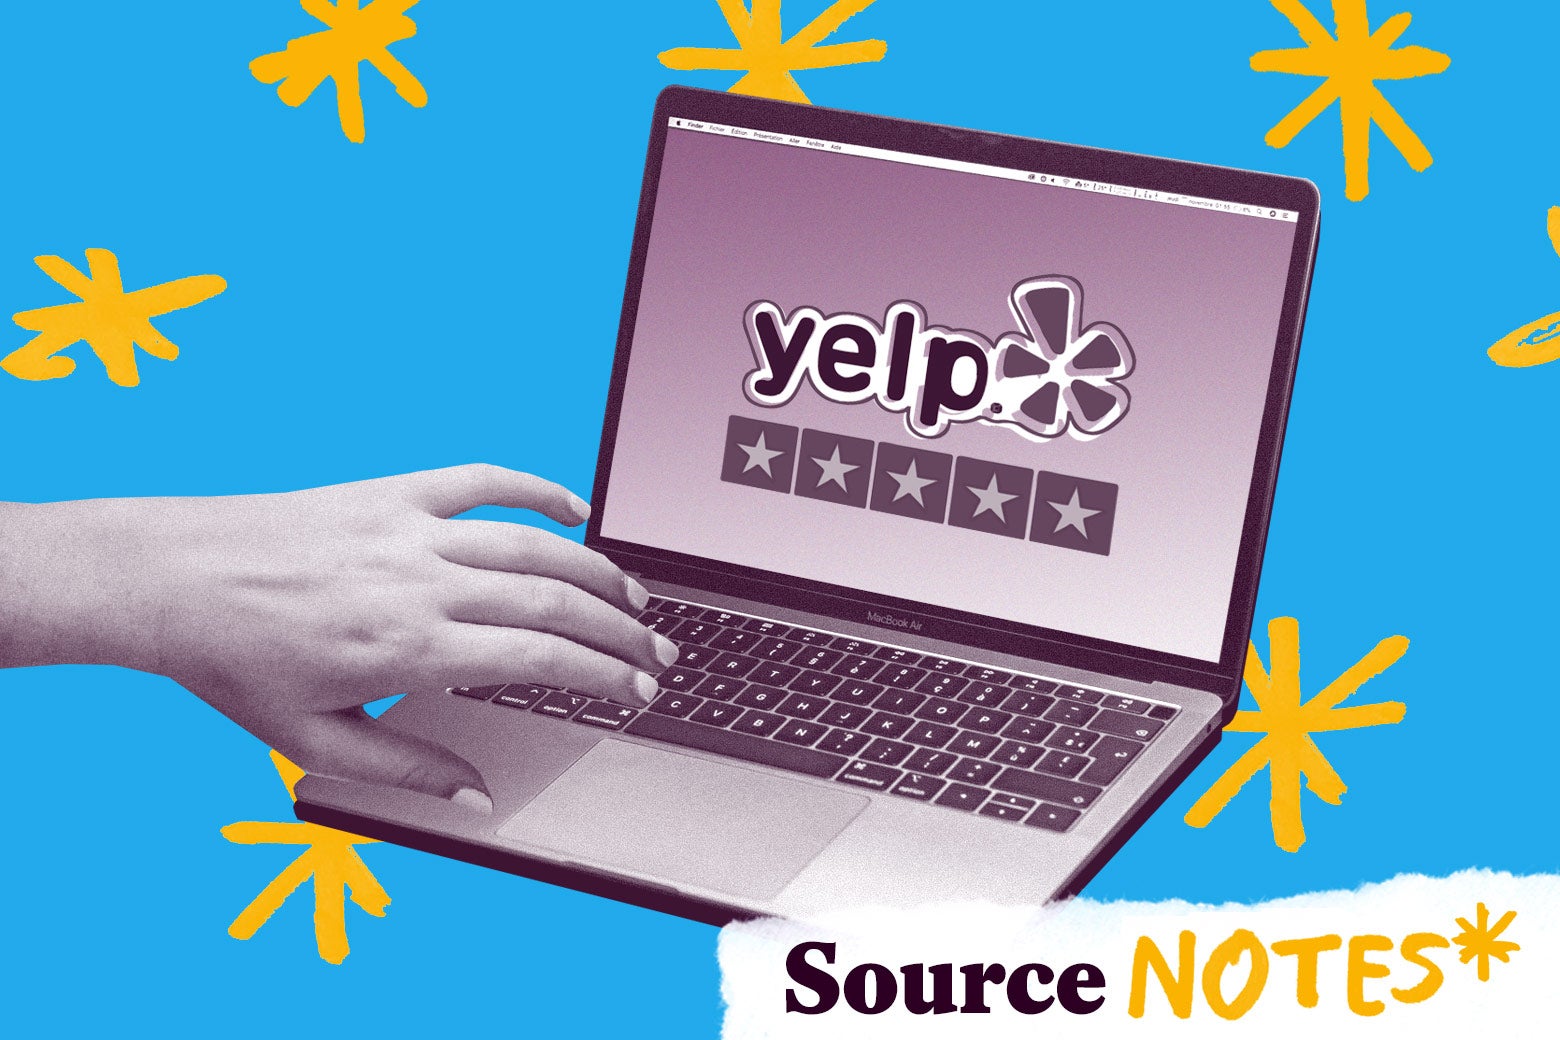 Photo illustration of a hand on a laptop showing the Yelp logo.